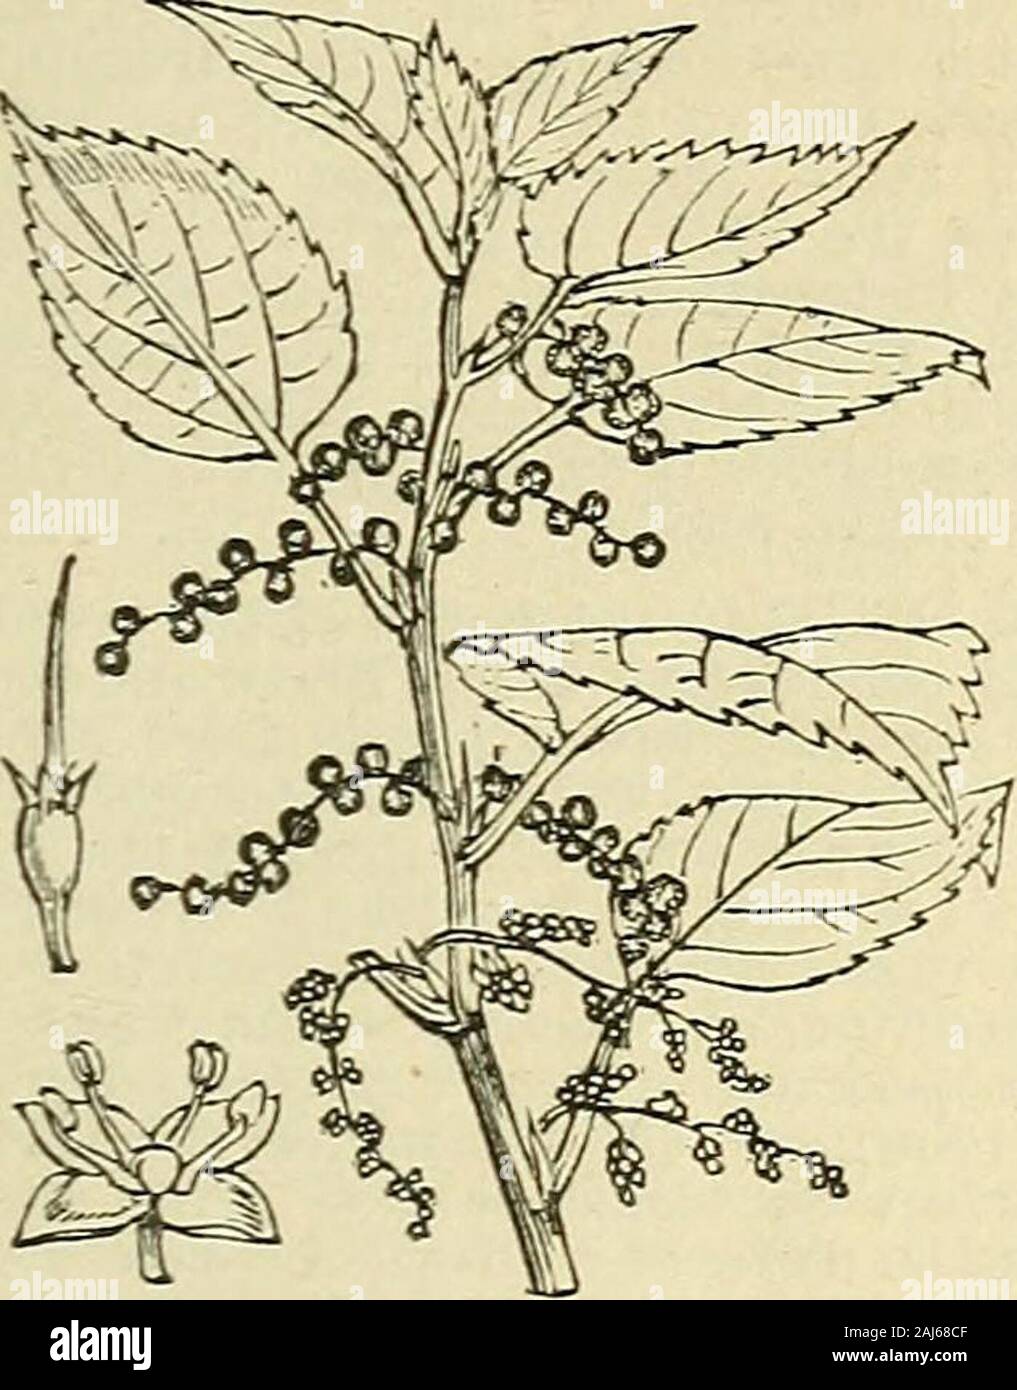 The treasury of botany: a popular dictionary of the vegetable kingdom; with which is incorporated a glossary of botanical terms . erousspecies distributed throughout the tropicsand subtropics of both hemispheres. Theyare herbaceous plants or shrubs, closelyallied to true nettles (Urfica),but differingfrom them in not having stinginghairs. Themale and female flowers are produced inseparate spikes on the same plant: themales having a four-parted calyx and fourstamens, the females a tubular calyxdivided into four teeth at the top, and aslender style with hairs along one side.Several of the specie Stock Photo